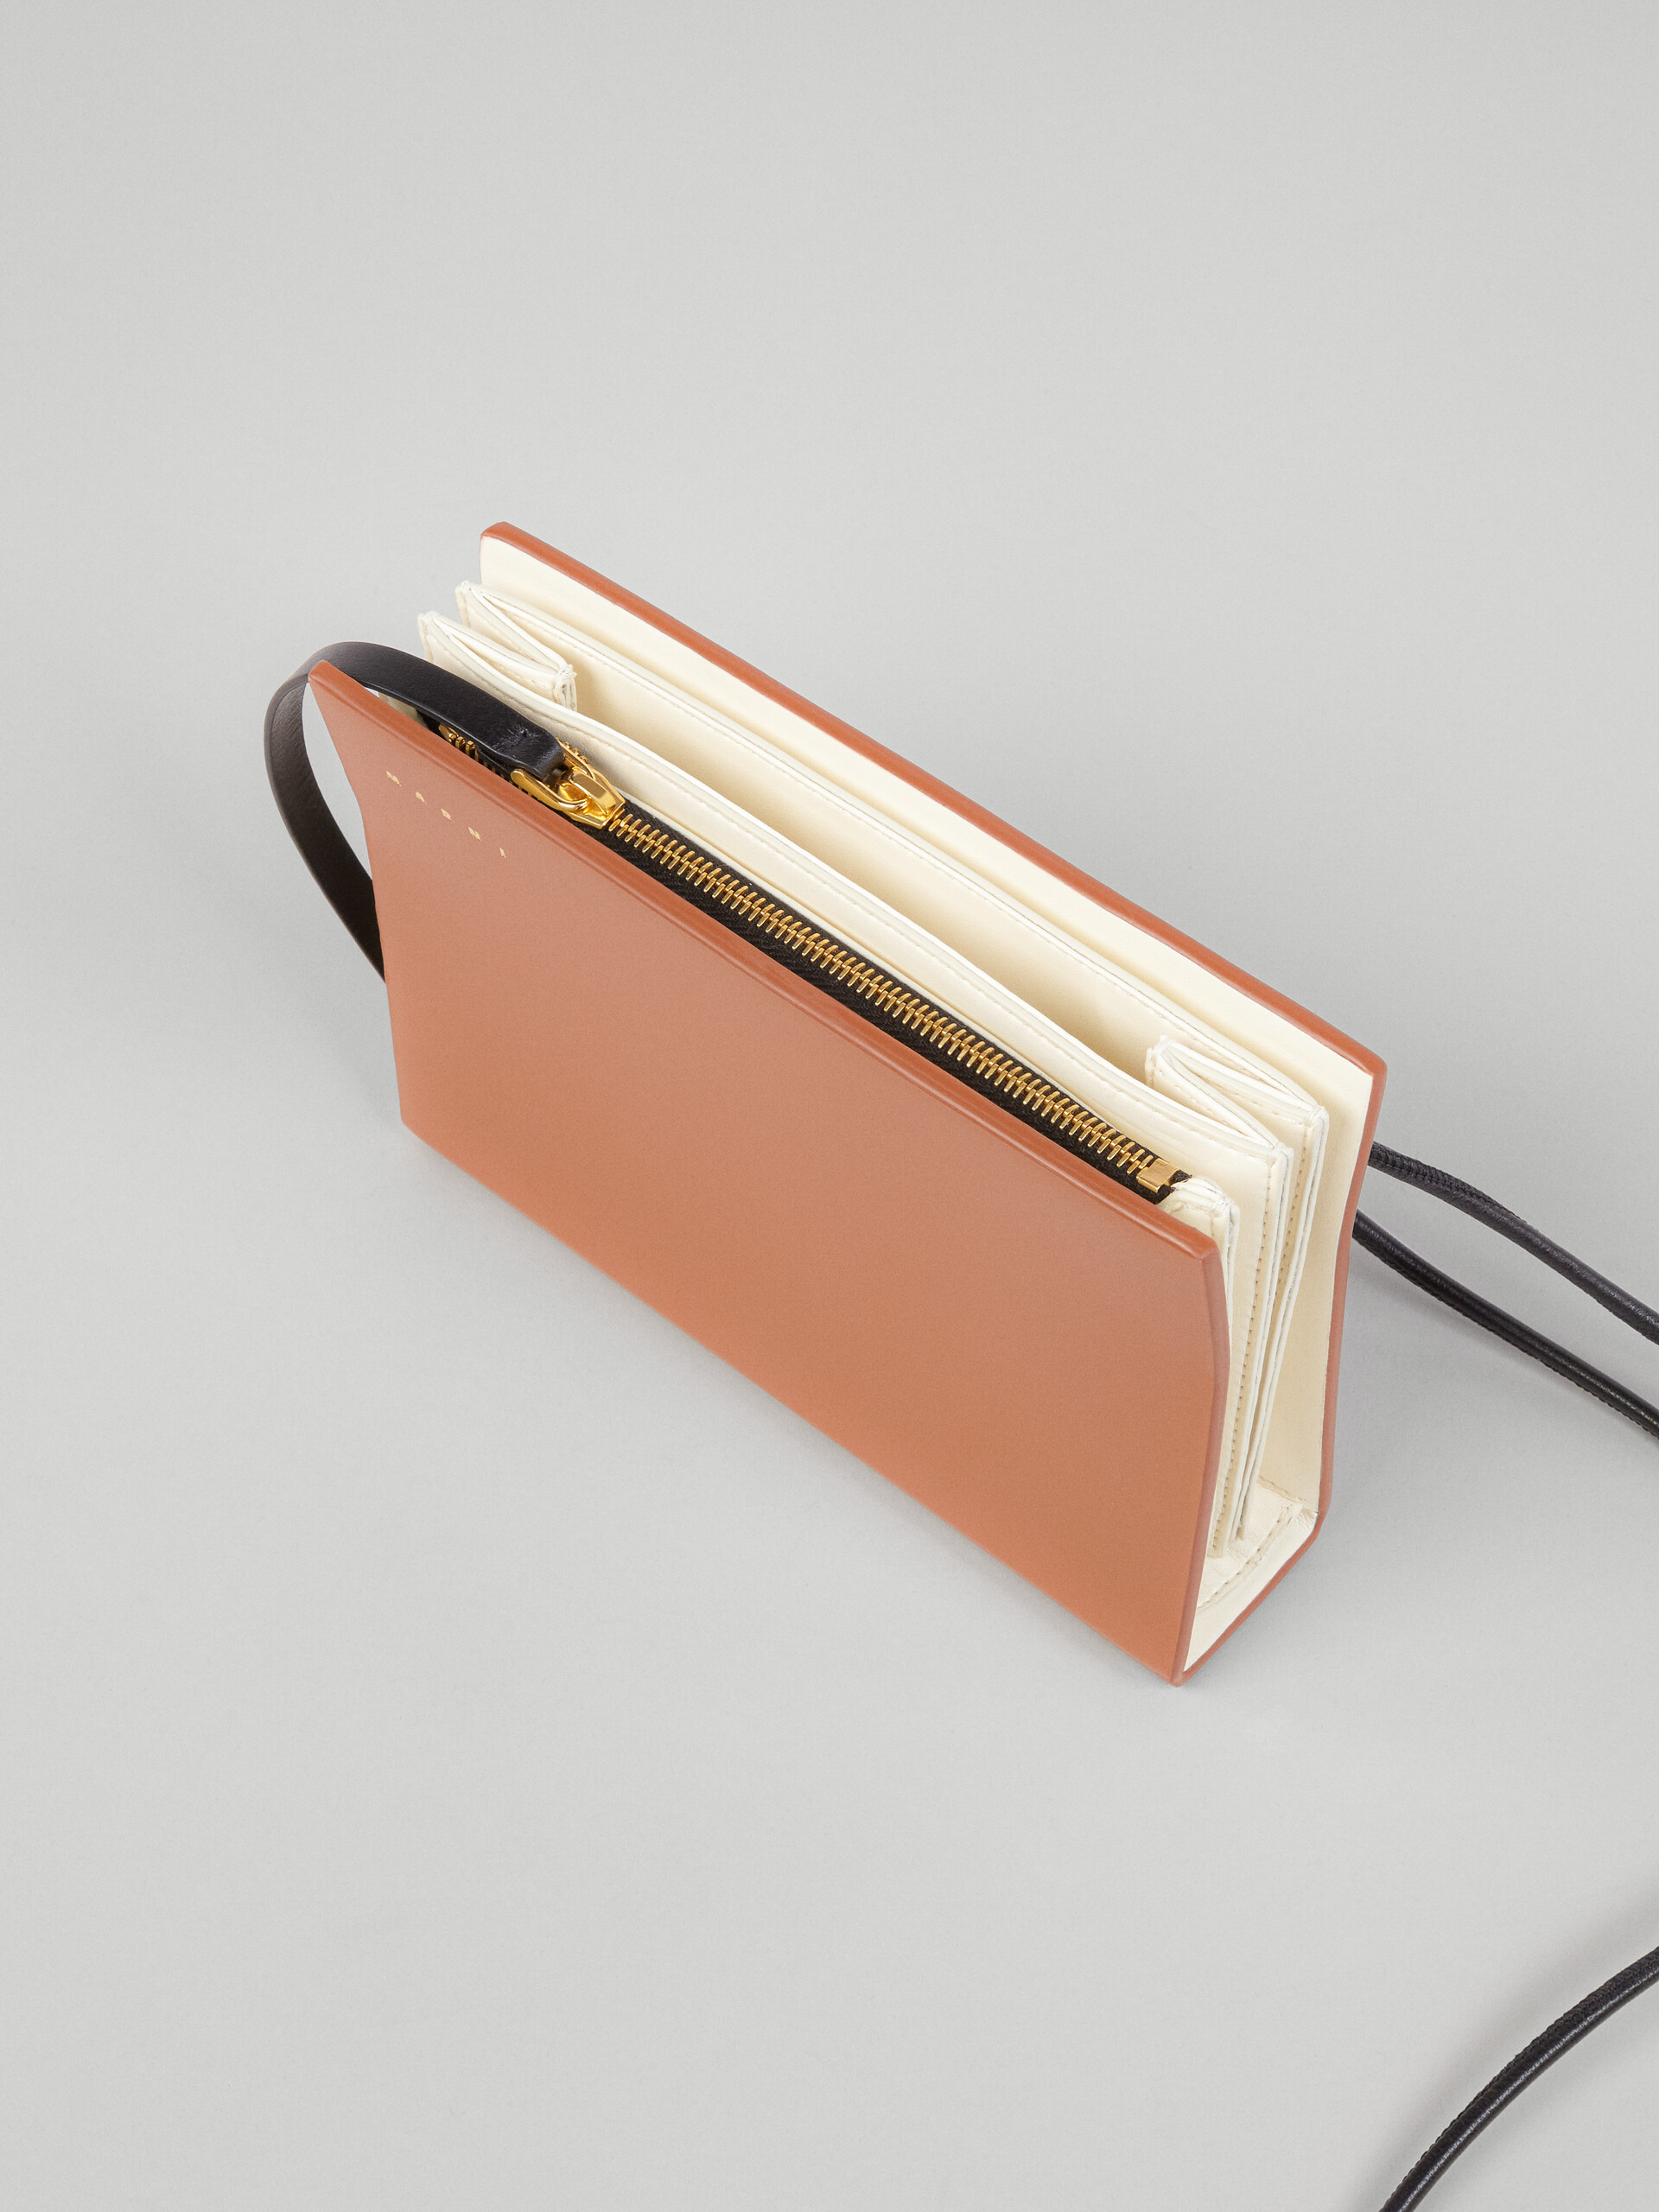 Brown and white leather clutch - Beutel - Image 5